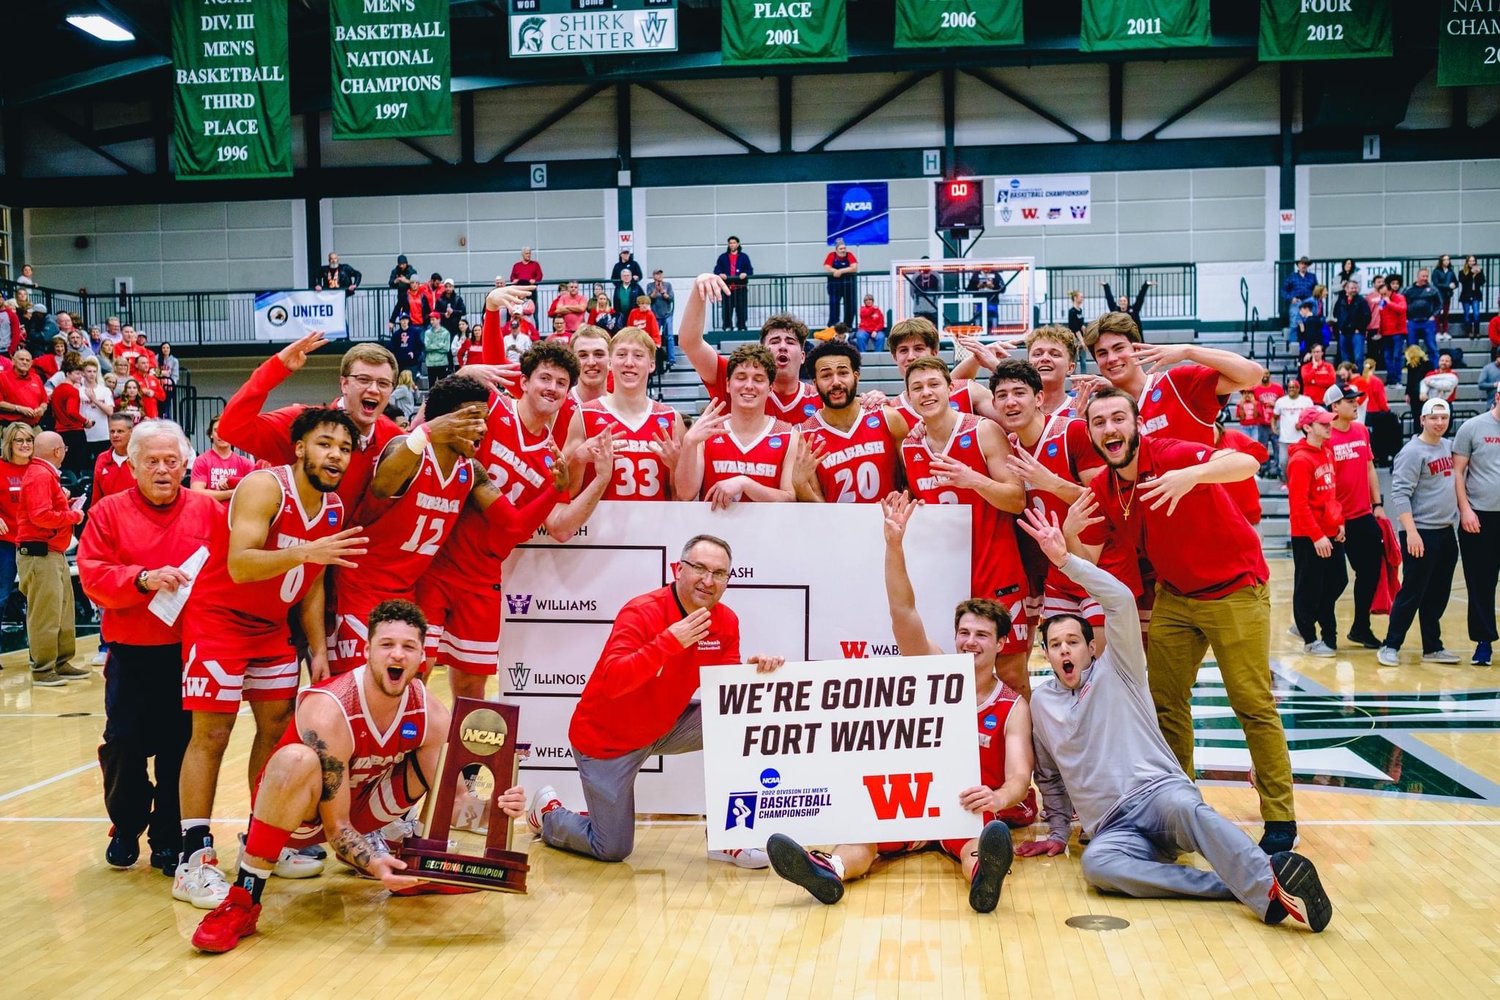 Wabash comes into Friday’s matchup with Elmhurst winners of 24 straight games. The Little Giants will look to cut down the nets one more time as they’re two wins away from a national championship.